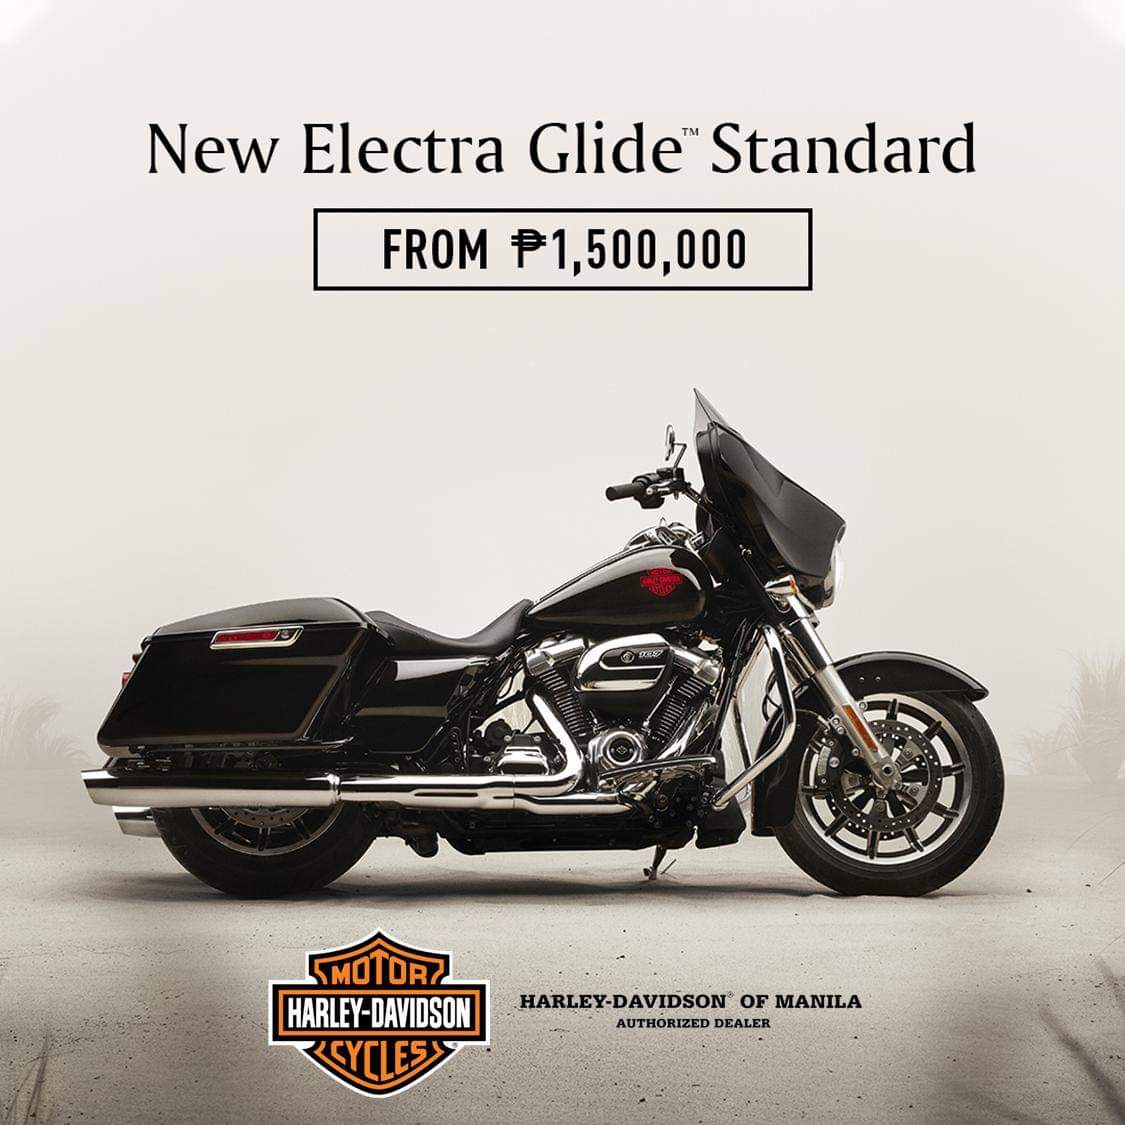 Harley Davidson to offer Electra Glide Touring in PH 